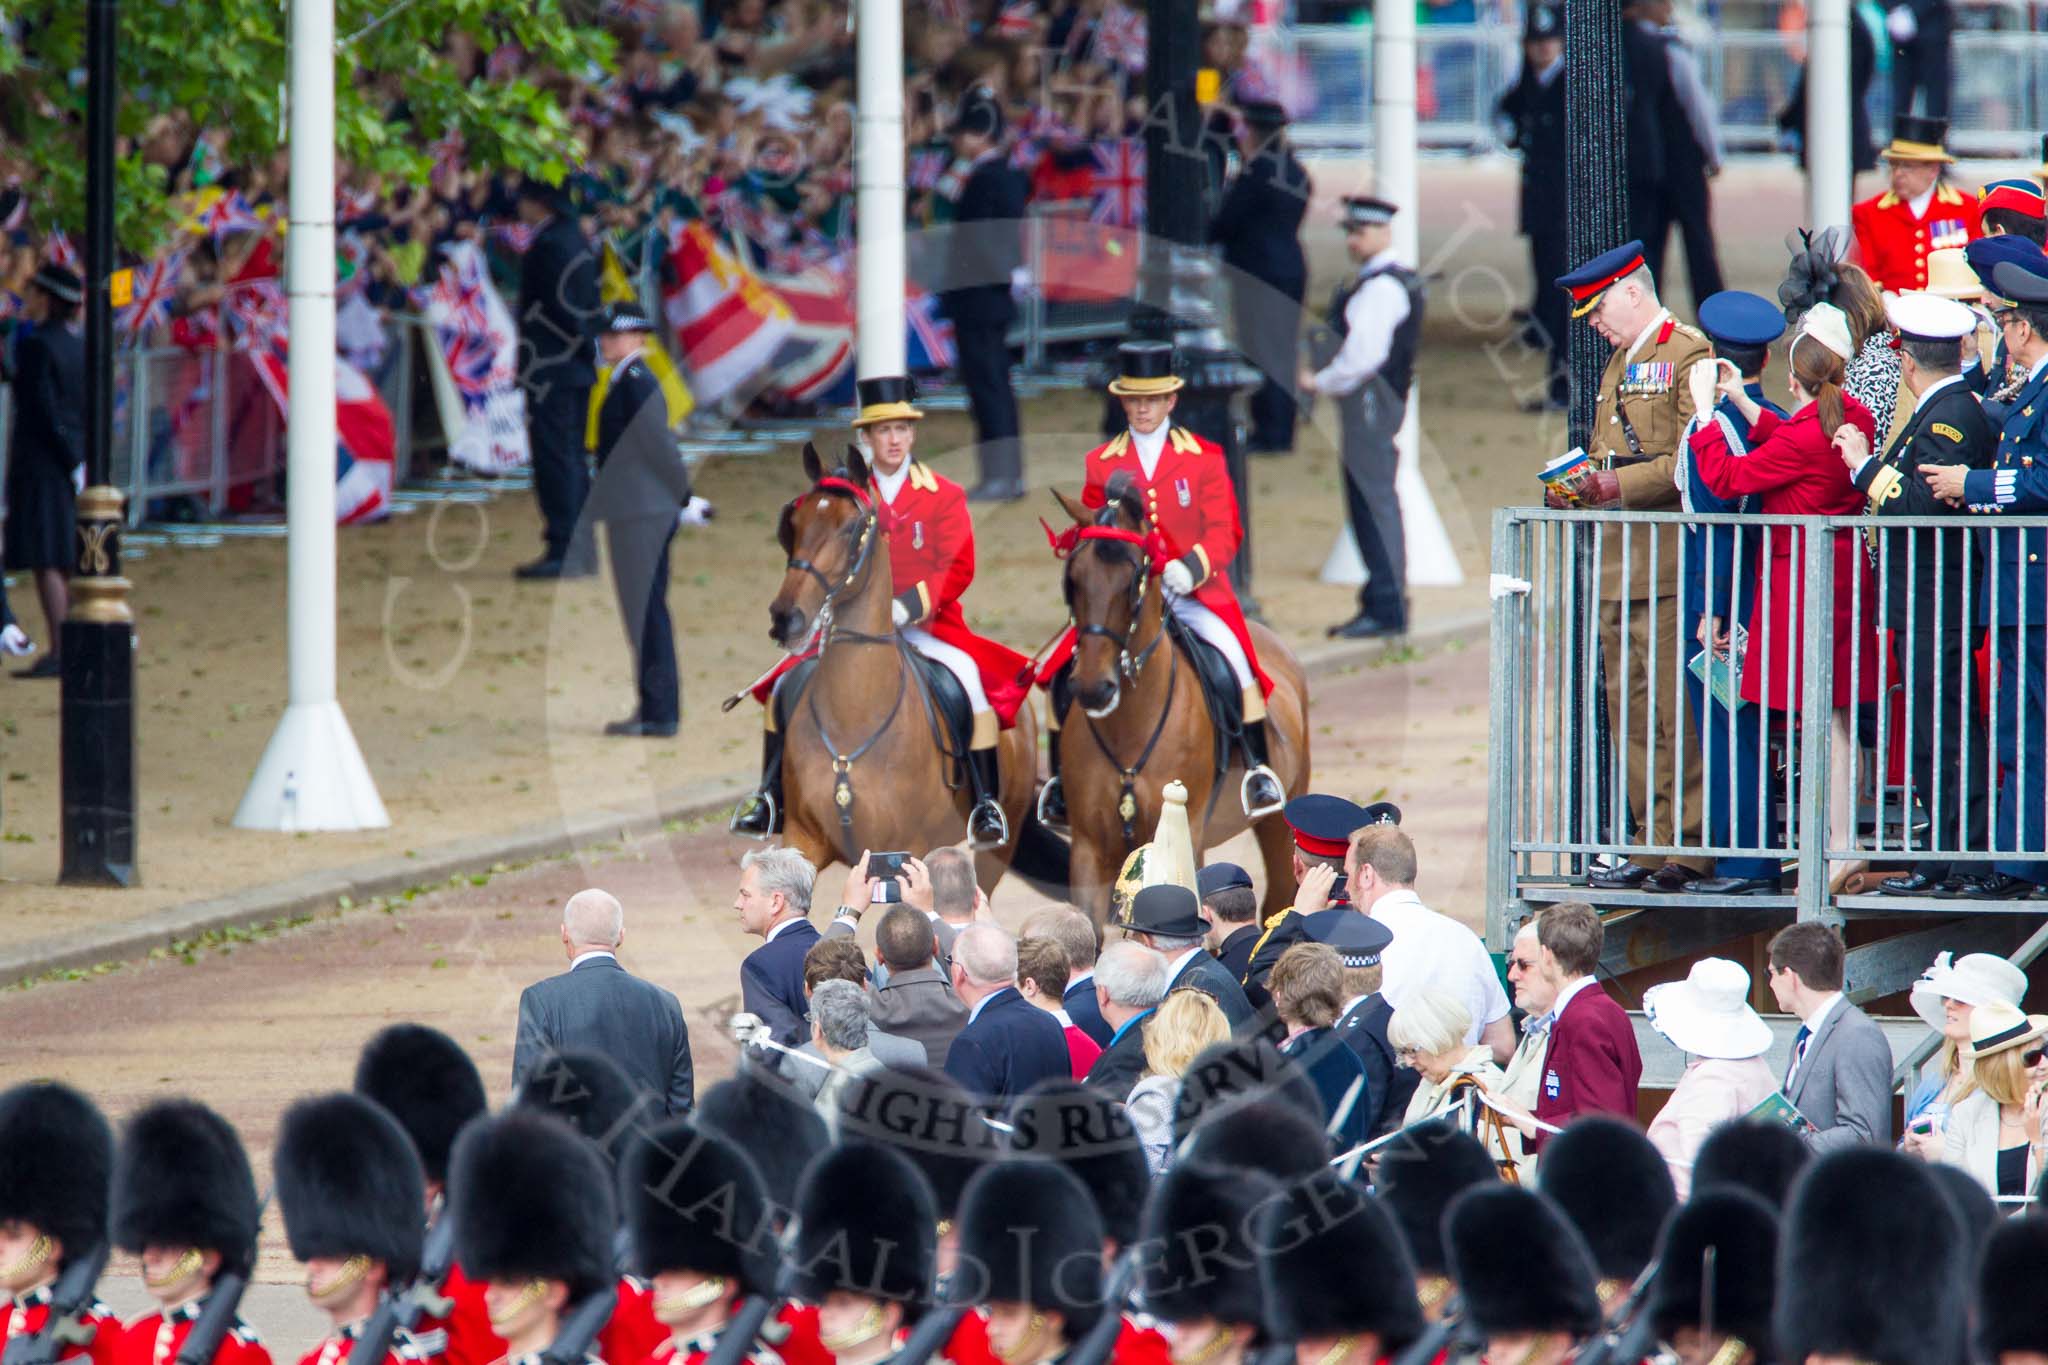 Trooping the Colour 2013: Two grooms are leading the line of coaches carrying members of the Royal Family across Horse Guards Parade. Image #179, 15 June 2013 10:48 Horse Guards Parade, London, UK